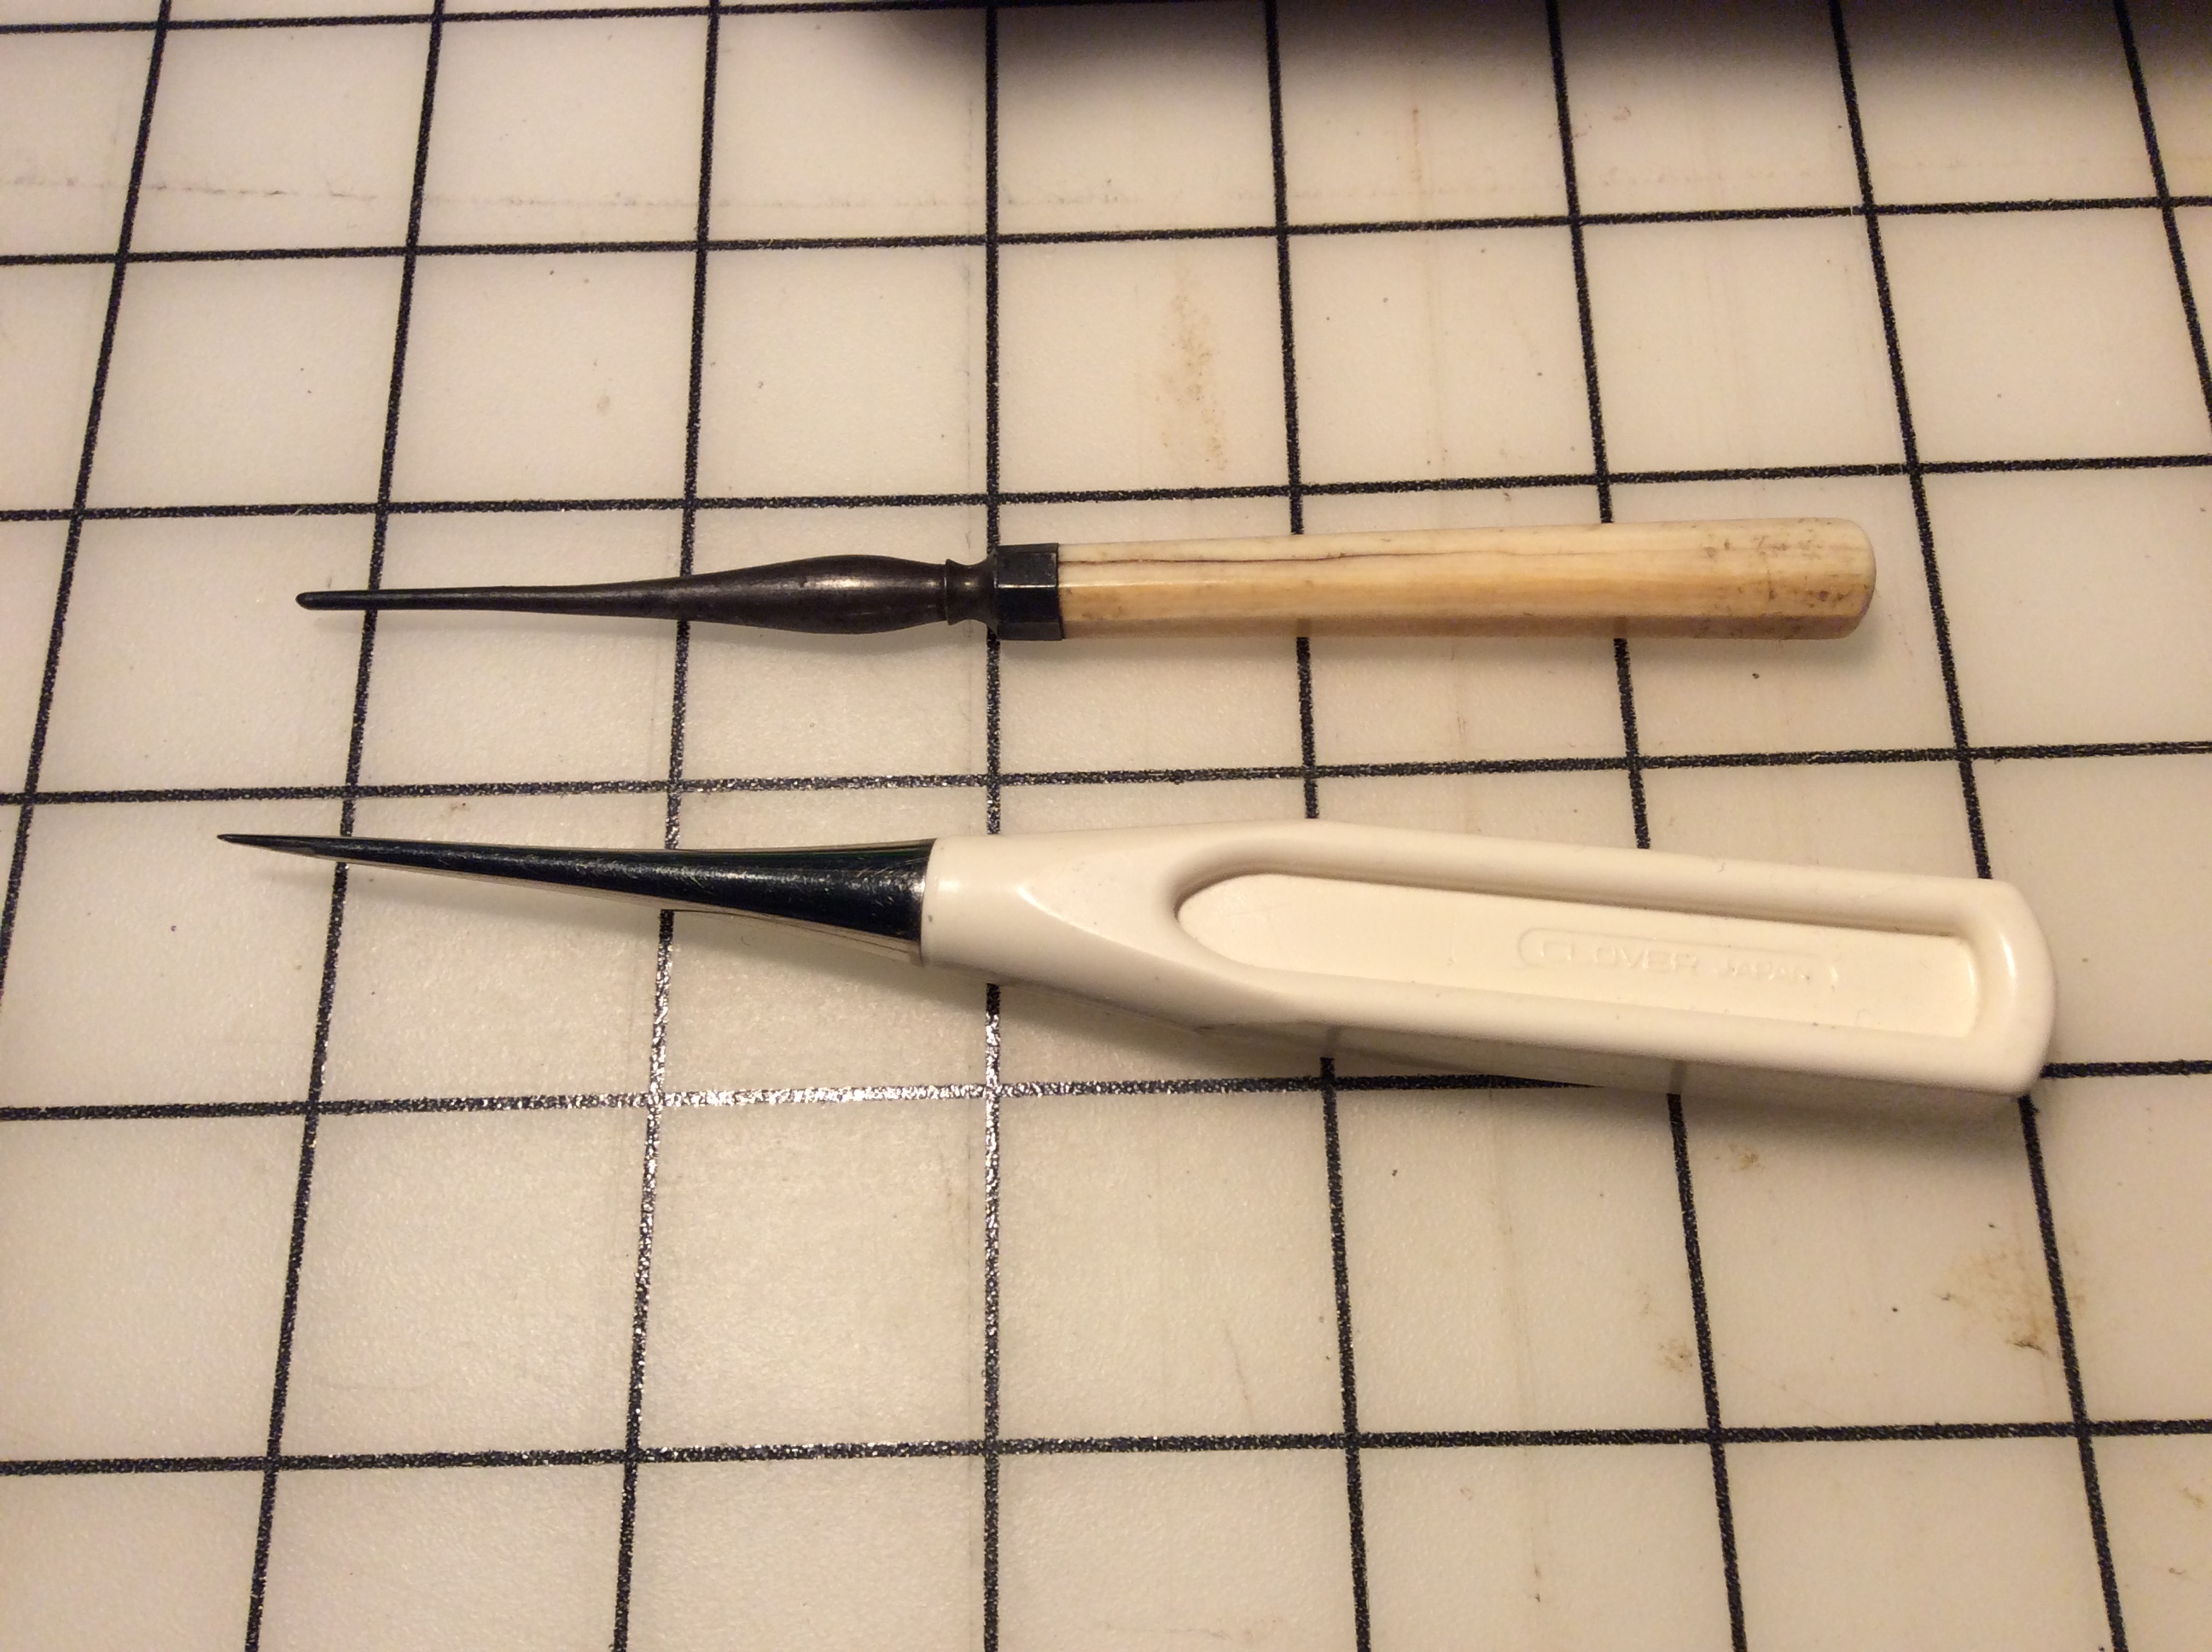 An antique tailor's awl compared to a new one.